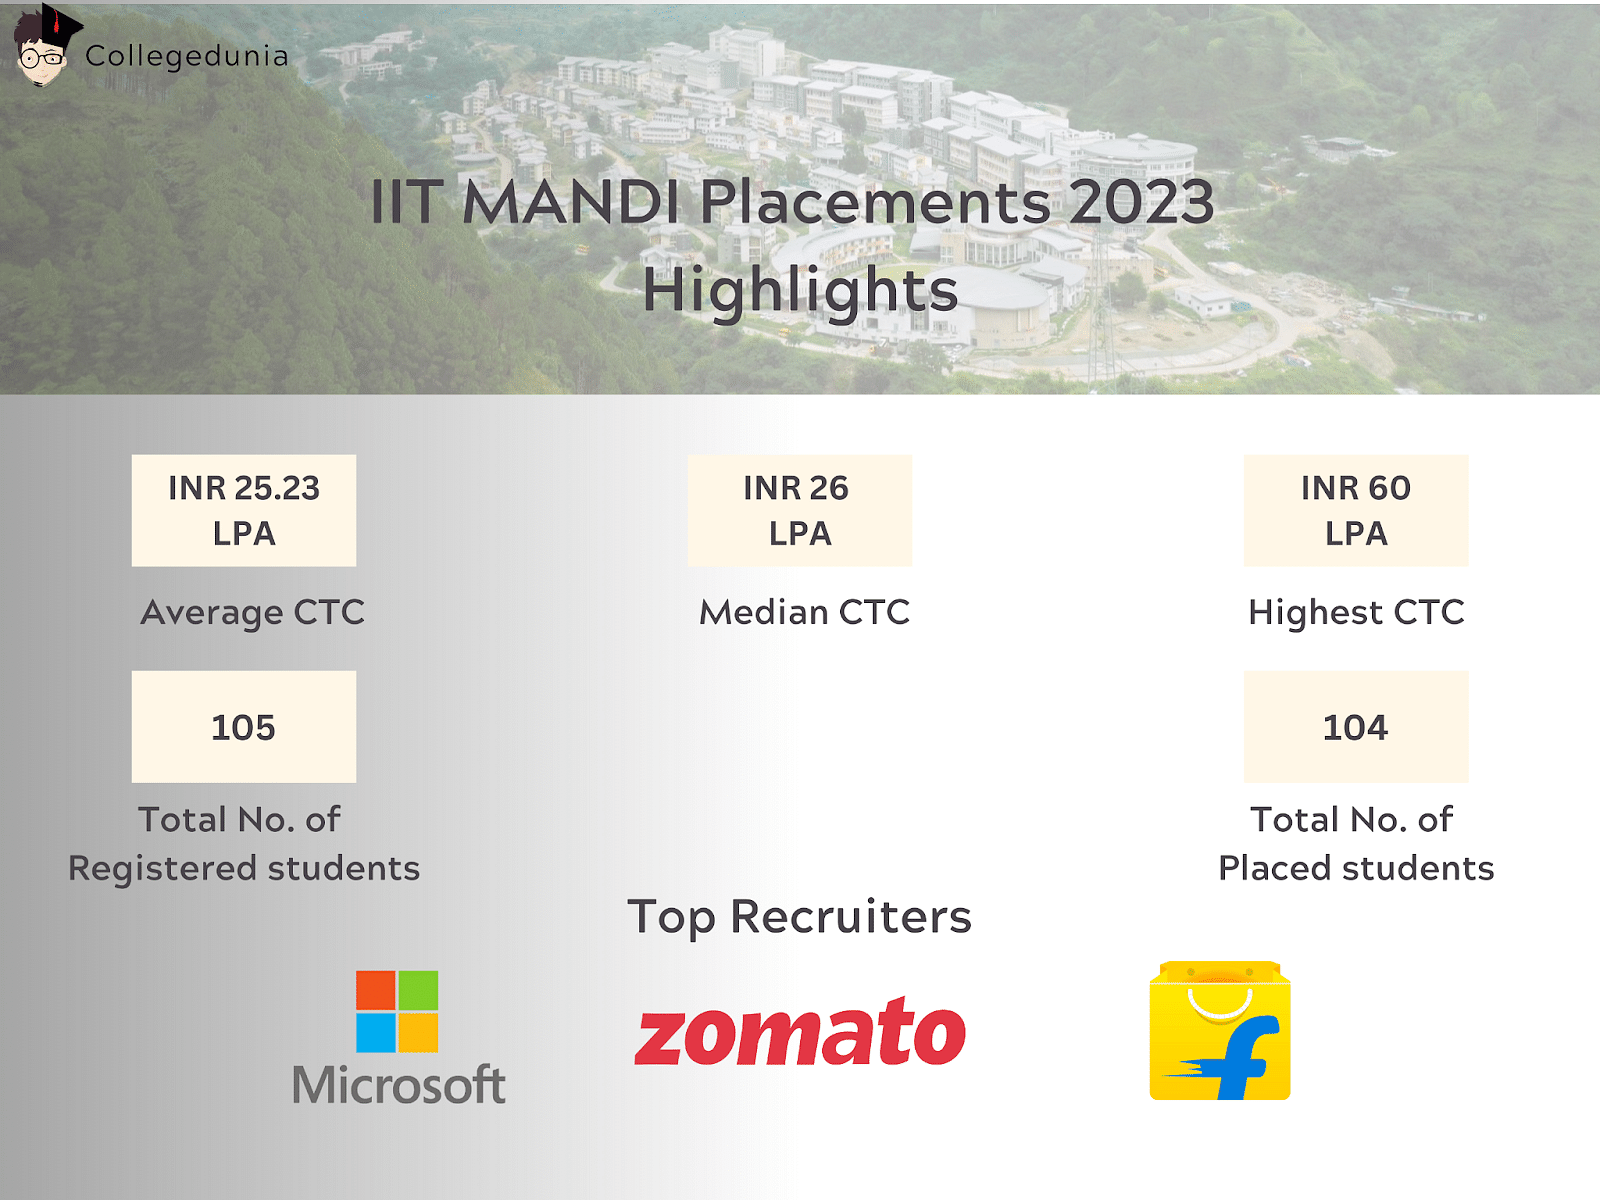 IIT Mandi Placements 2023 Average Package, Highest Package, Top Recruiters